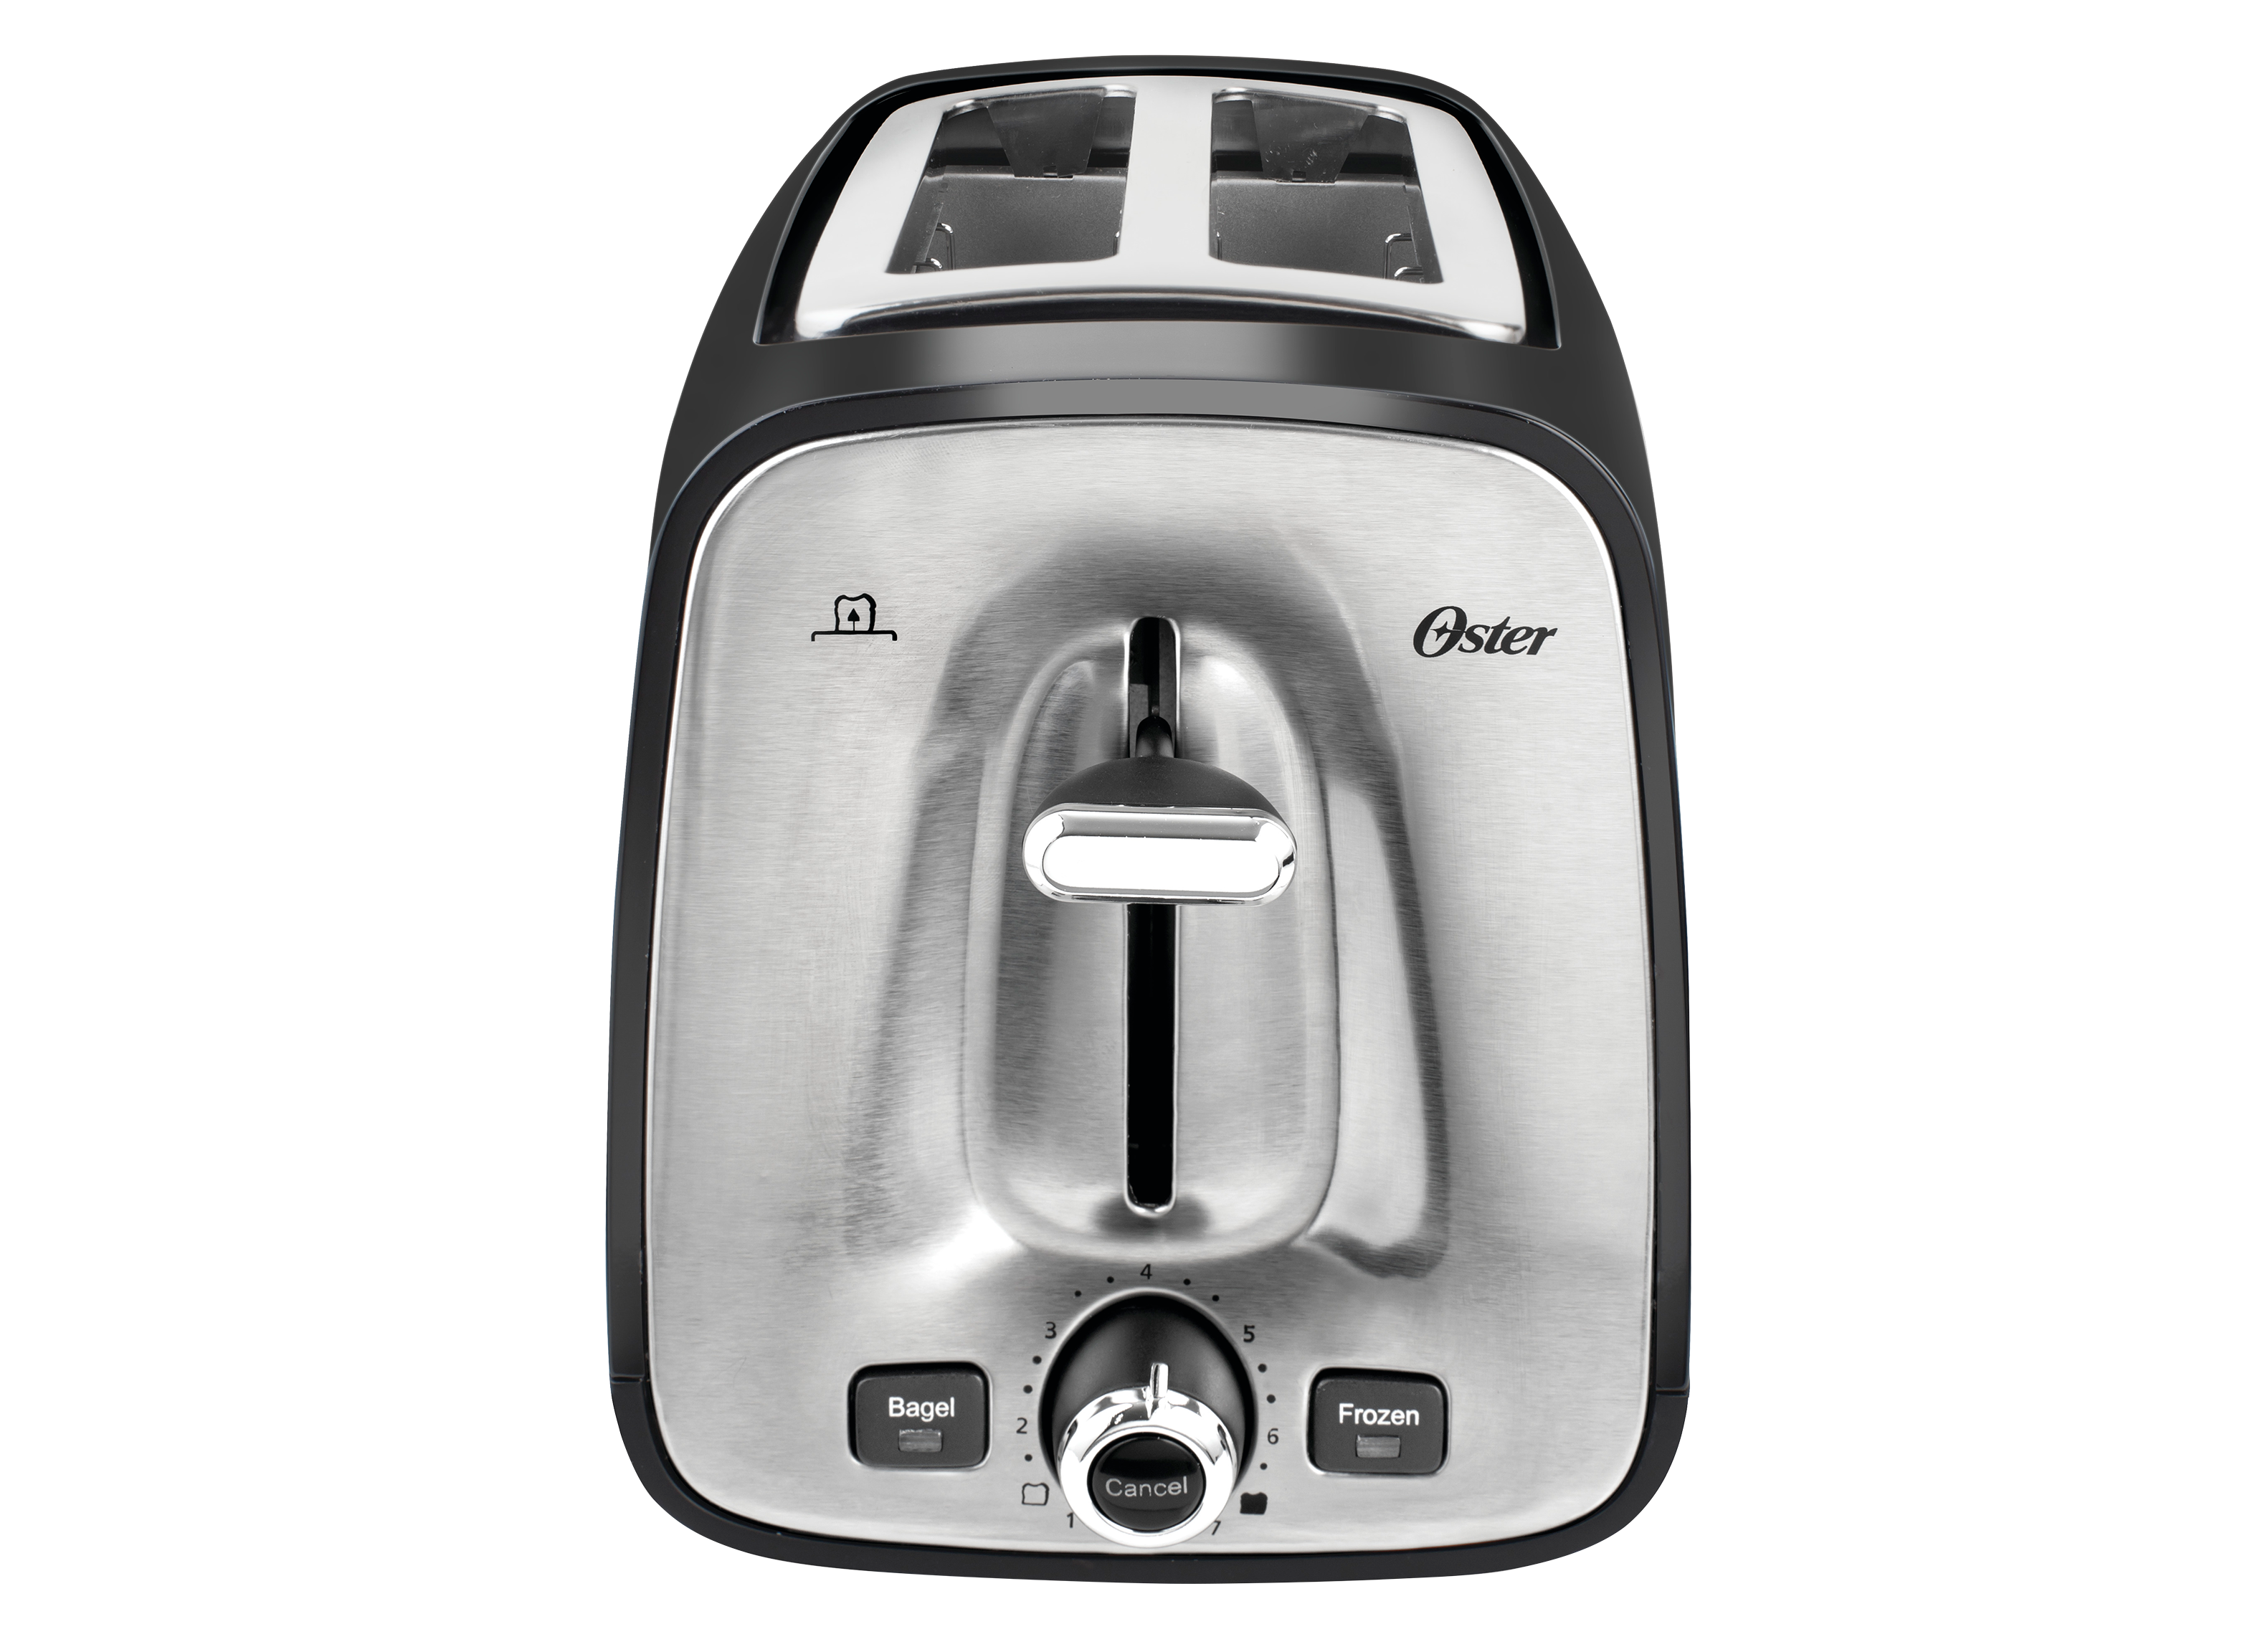 https://crdms.images.consumerreports.org/prod/products/cr/models/398534-toasters-oster-2-slice-tssttrp2sl-b-10004904.png